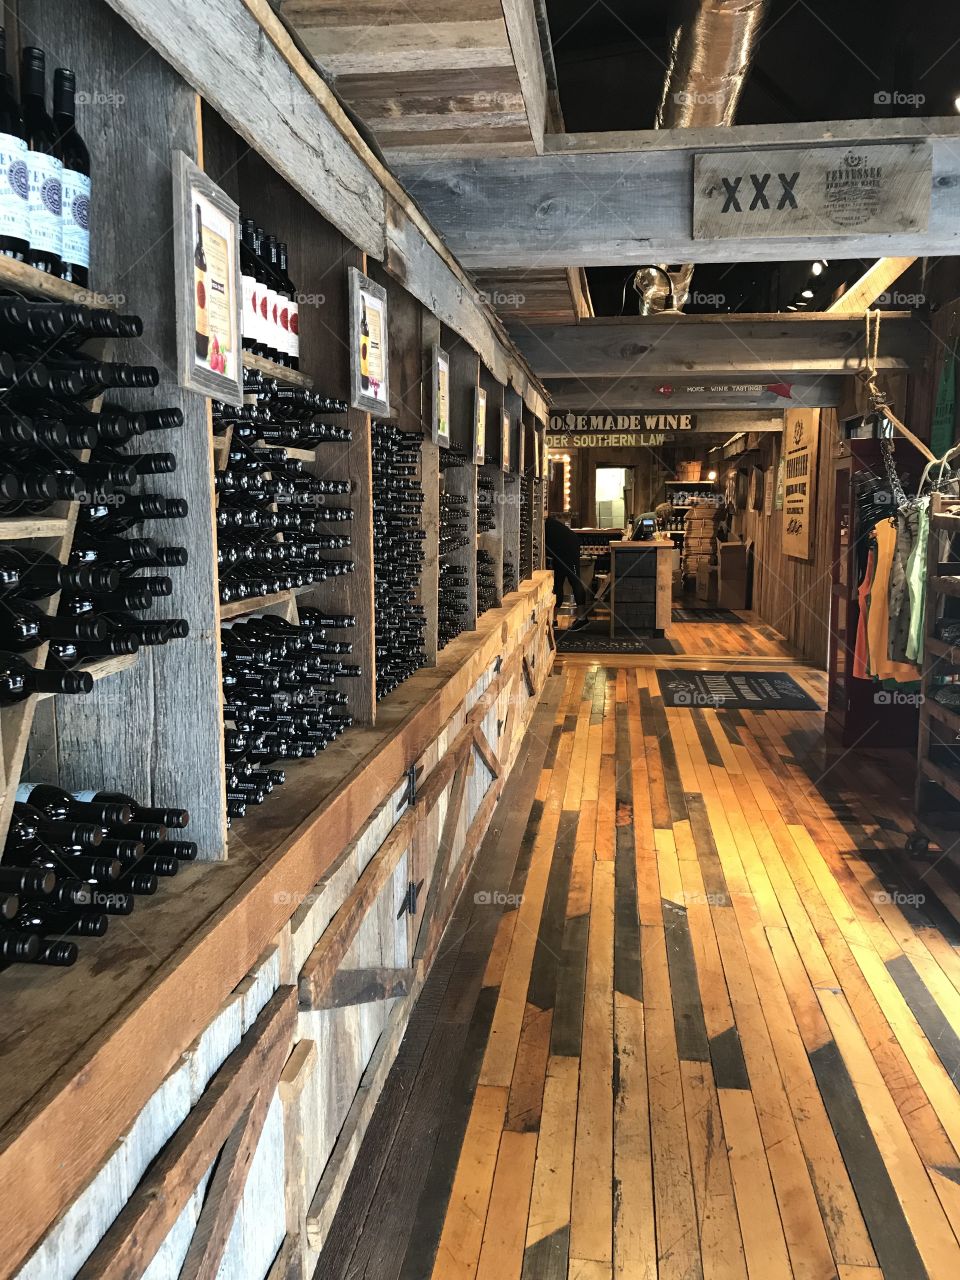 Country Wine shop